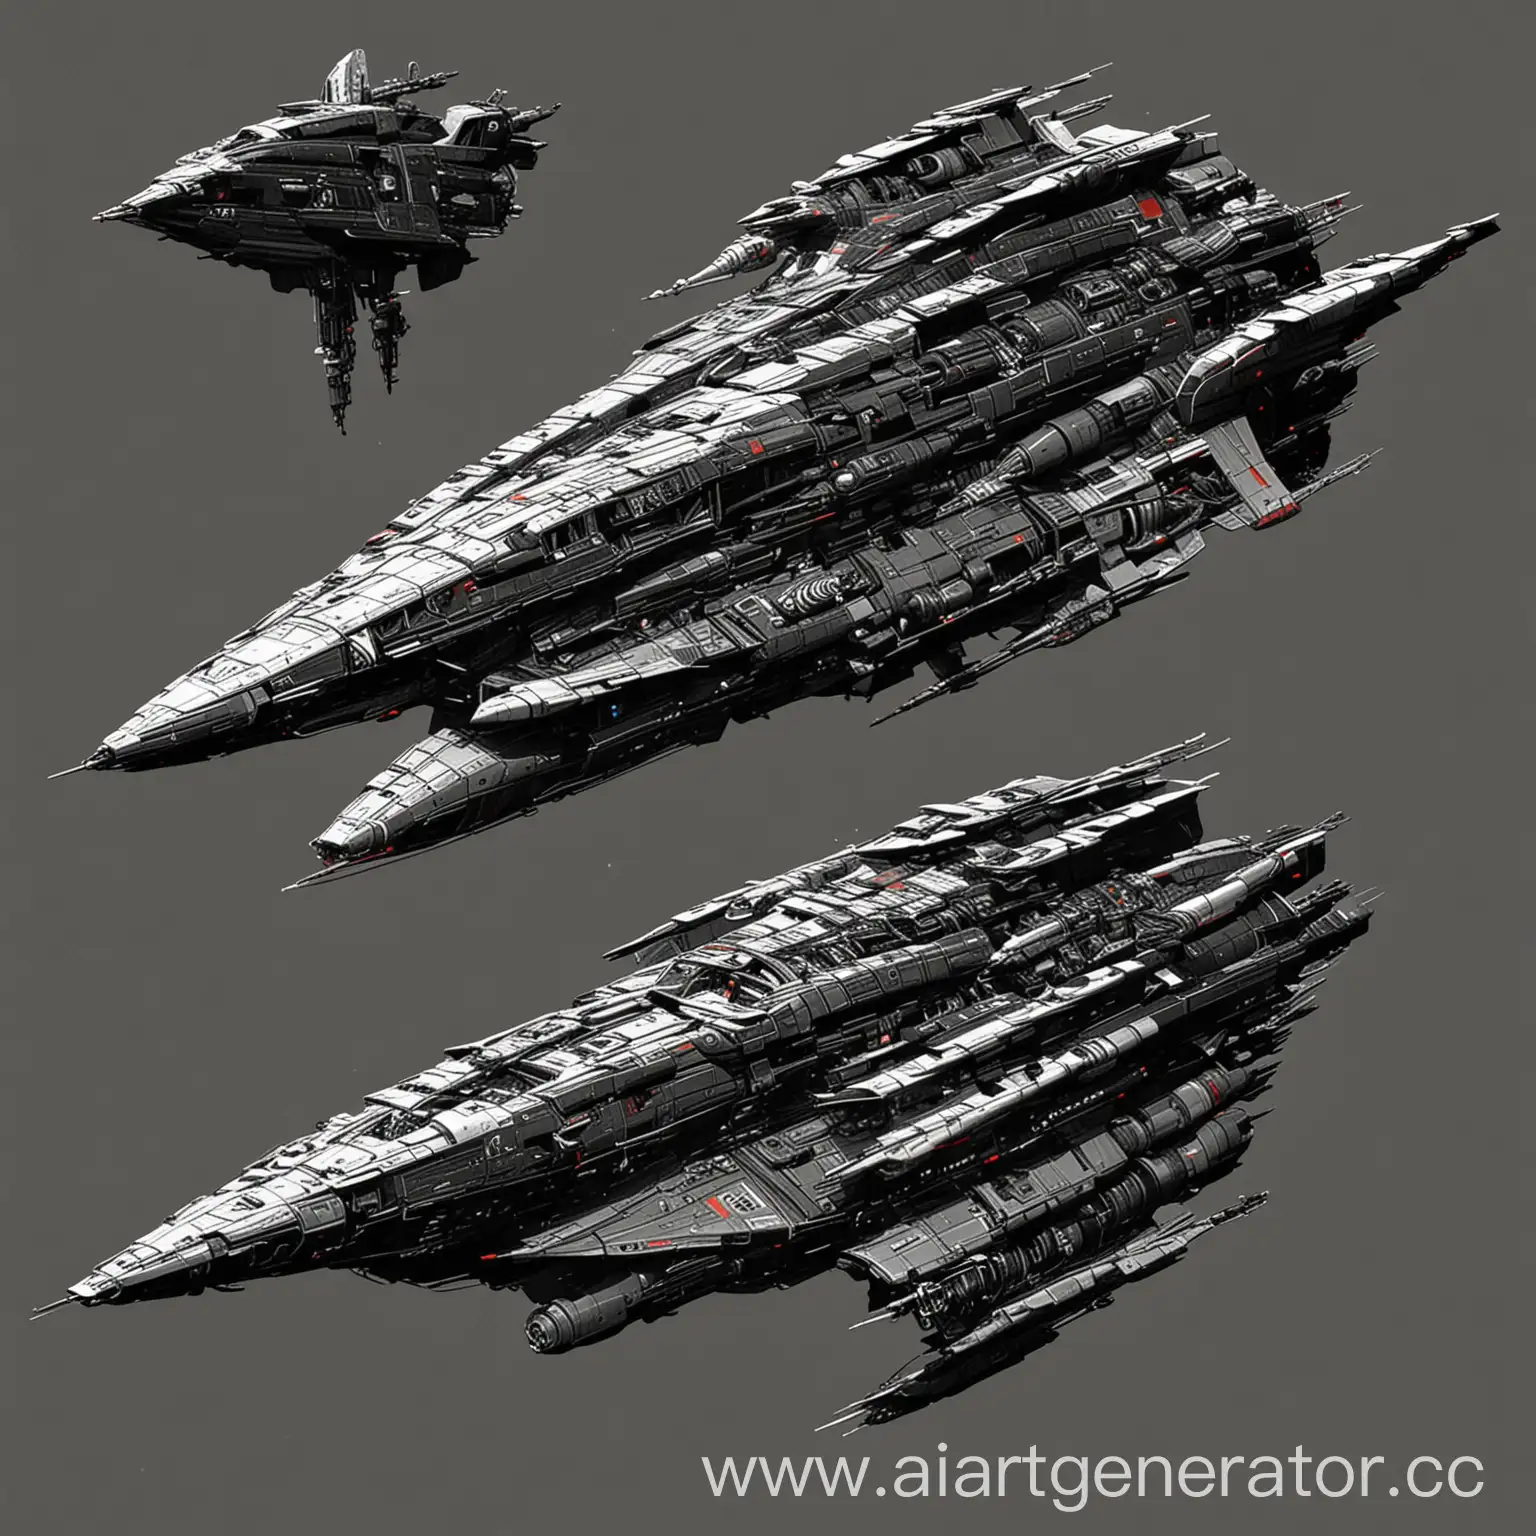 Majestic-Spaceship-Design-Inspired-by-Captain-Harlock-2013-and-Mass-Effect